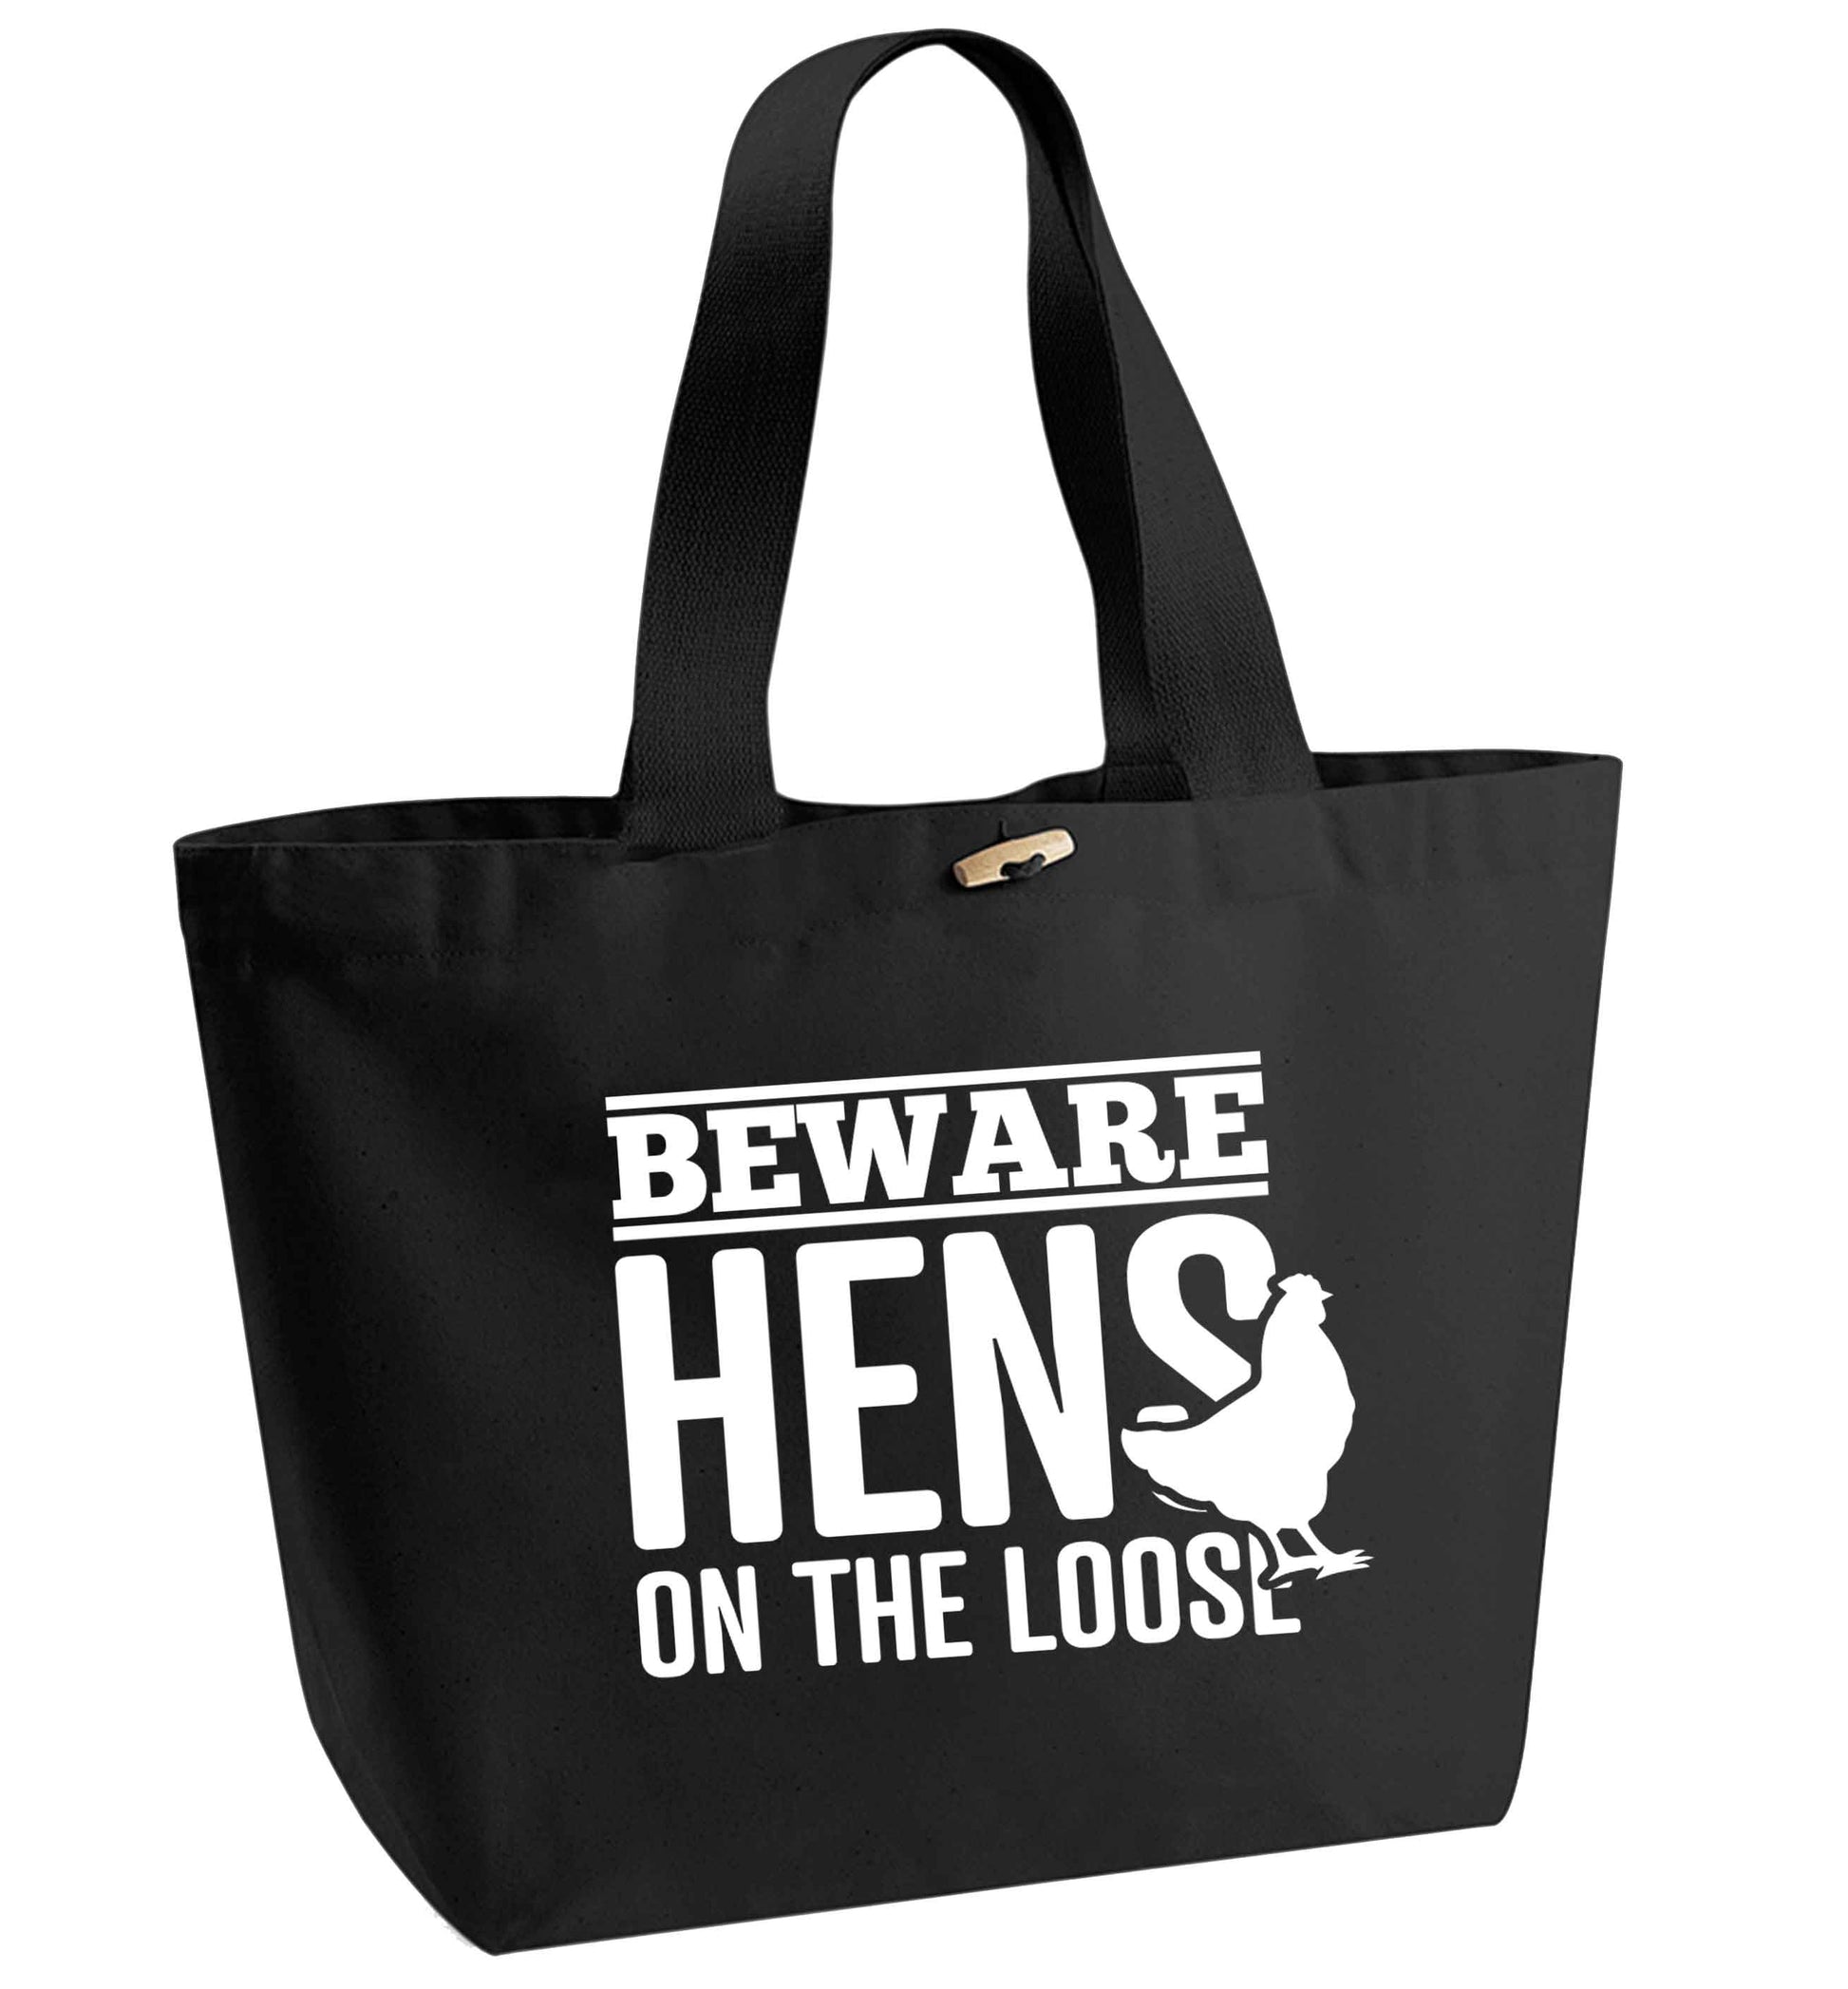 Beware hens on the loose organic cotton premium tote bag with wooden toggle in black